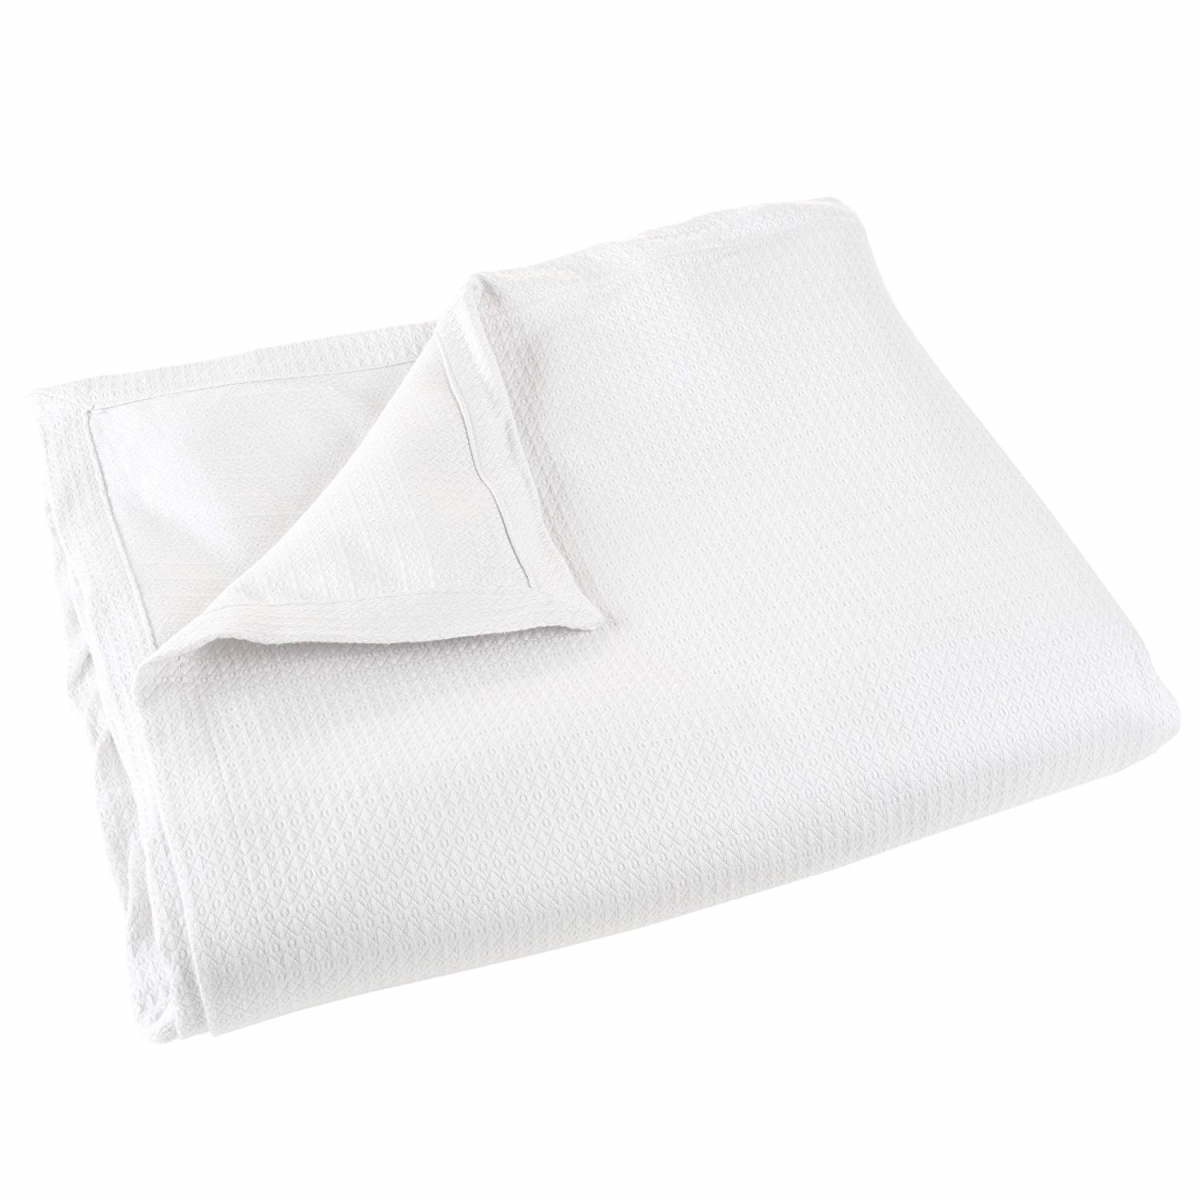 61a-43388 Soft Breathable 100 Percent Cotton Blanket, White - Twin Size